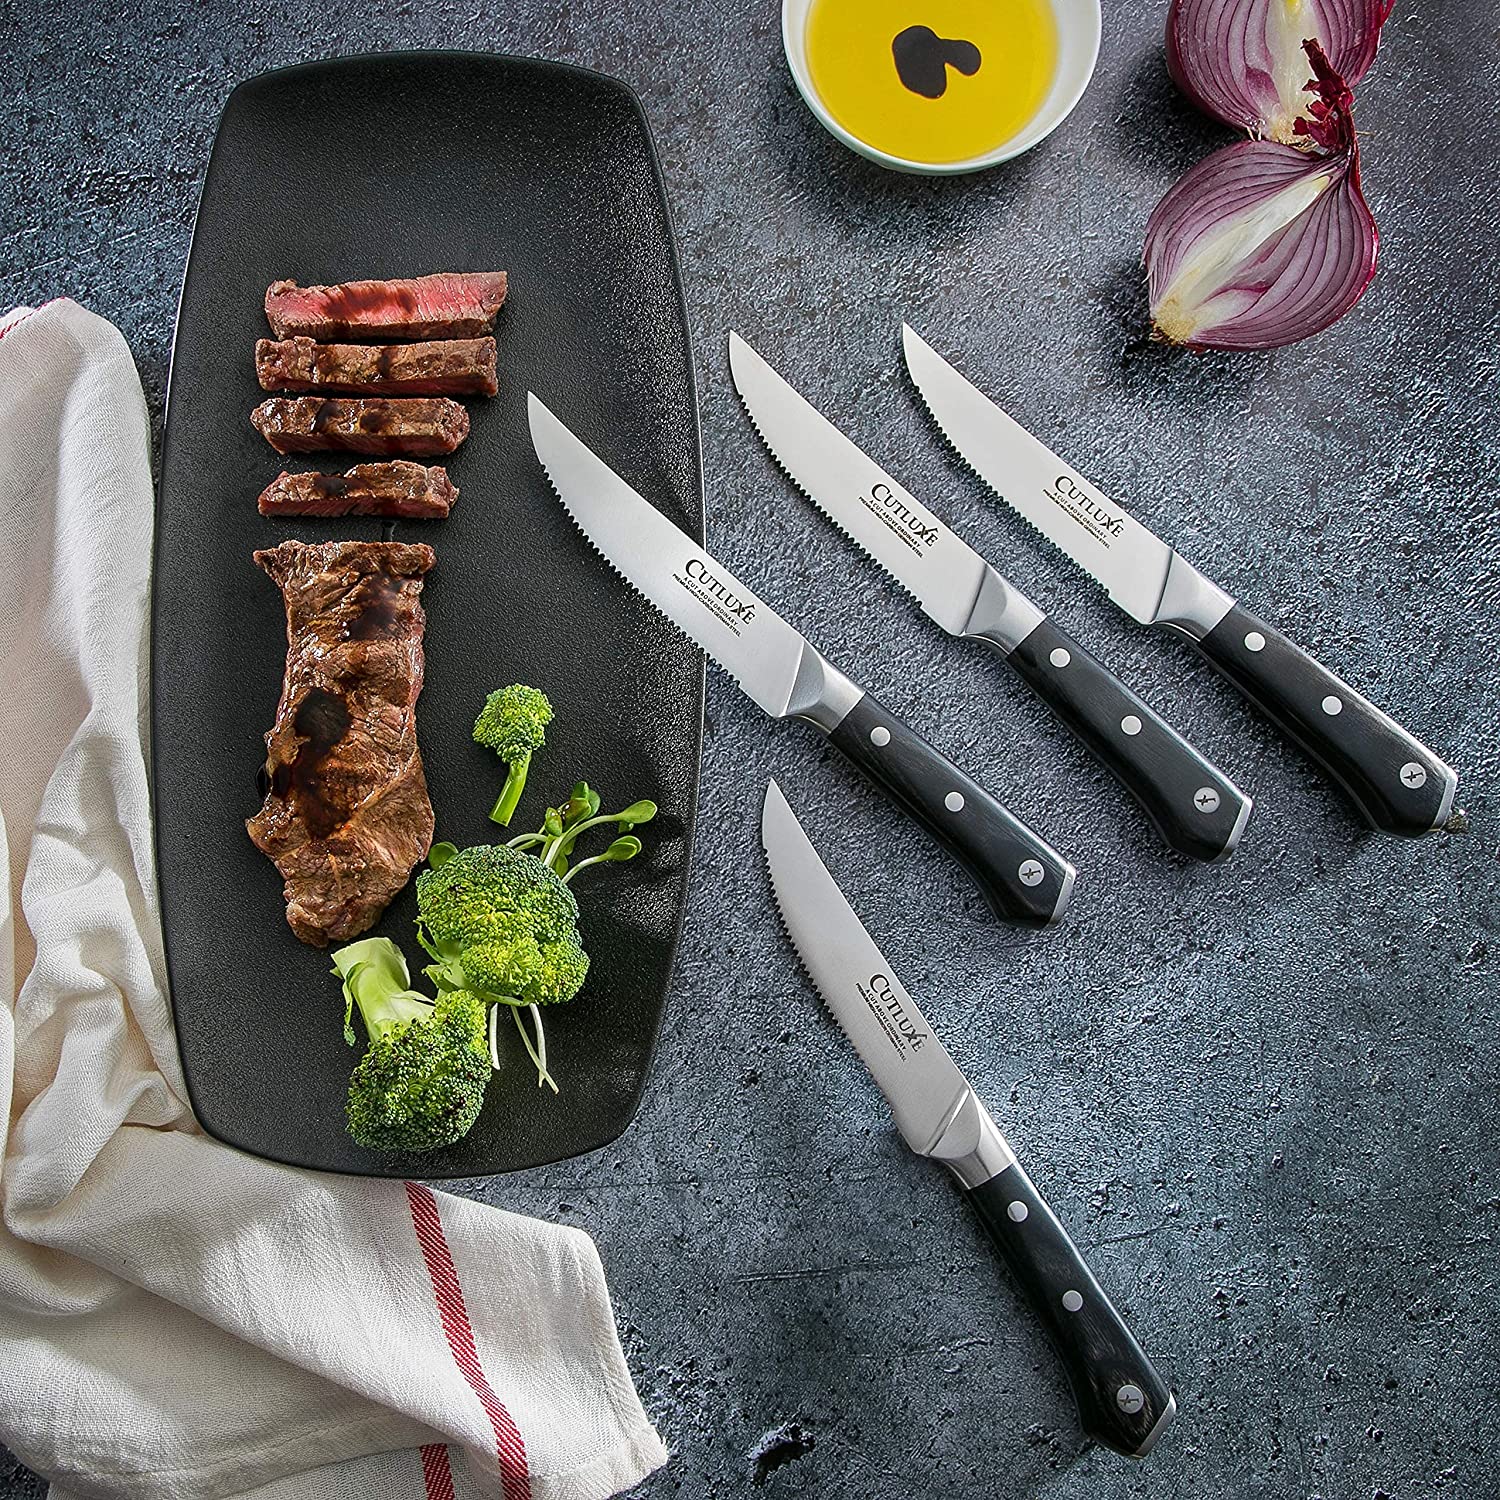 Serrated Vs Non Serrated Steak Knives: Main Differences – Cutluxe